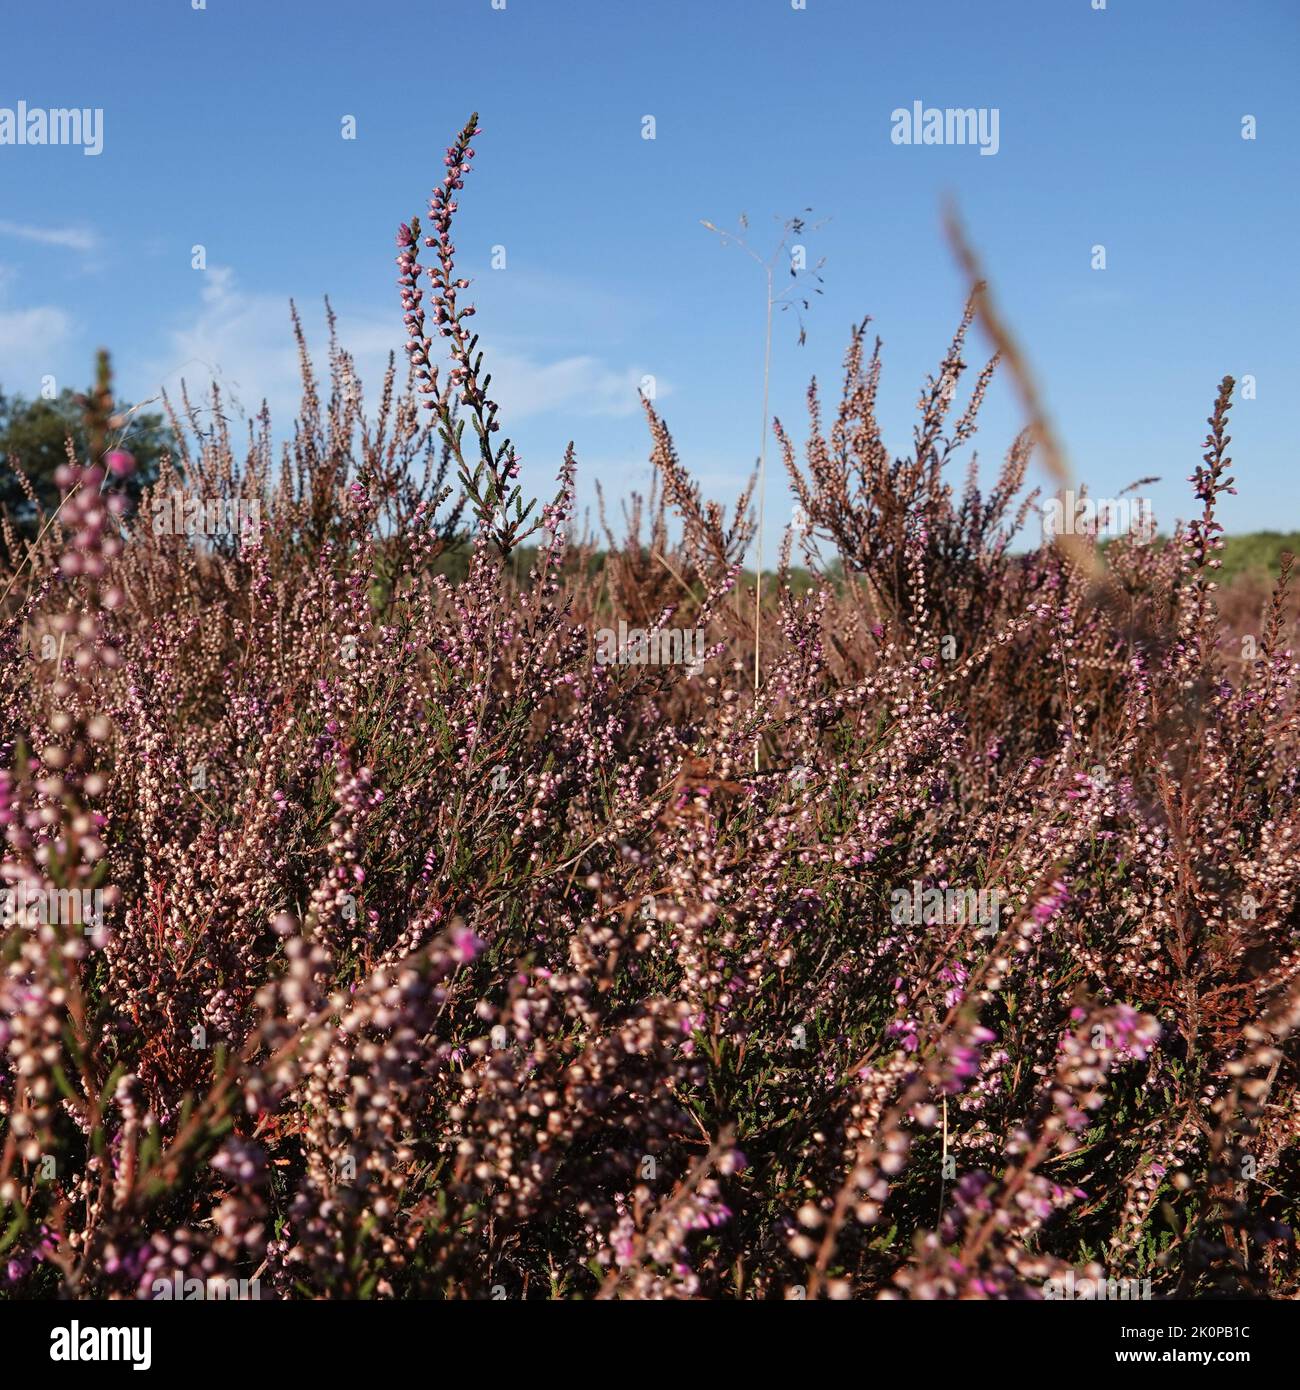 A beautiful pink blooming heather environment. It's dry this summer, so the heath is brownish-pink colored. Stock Photo